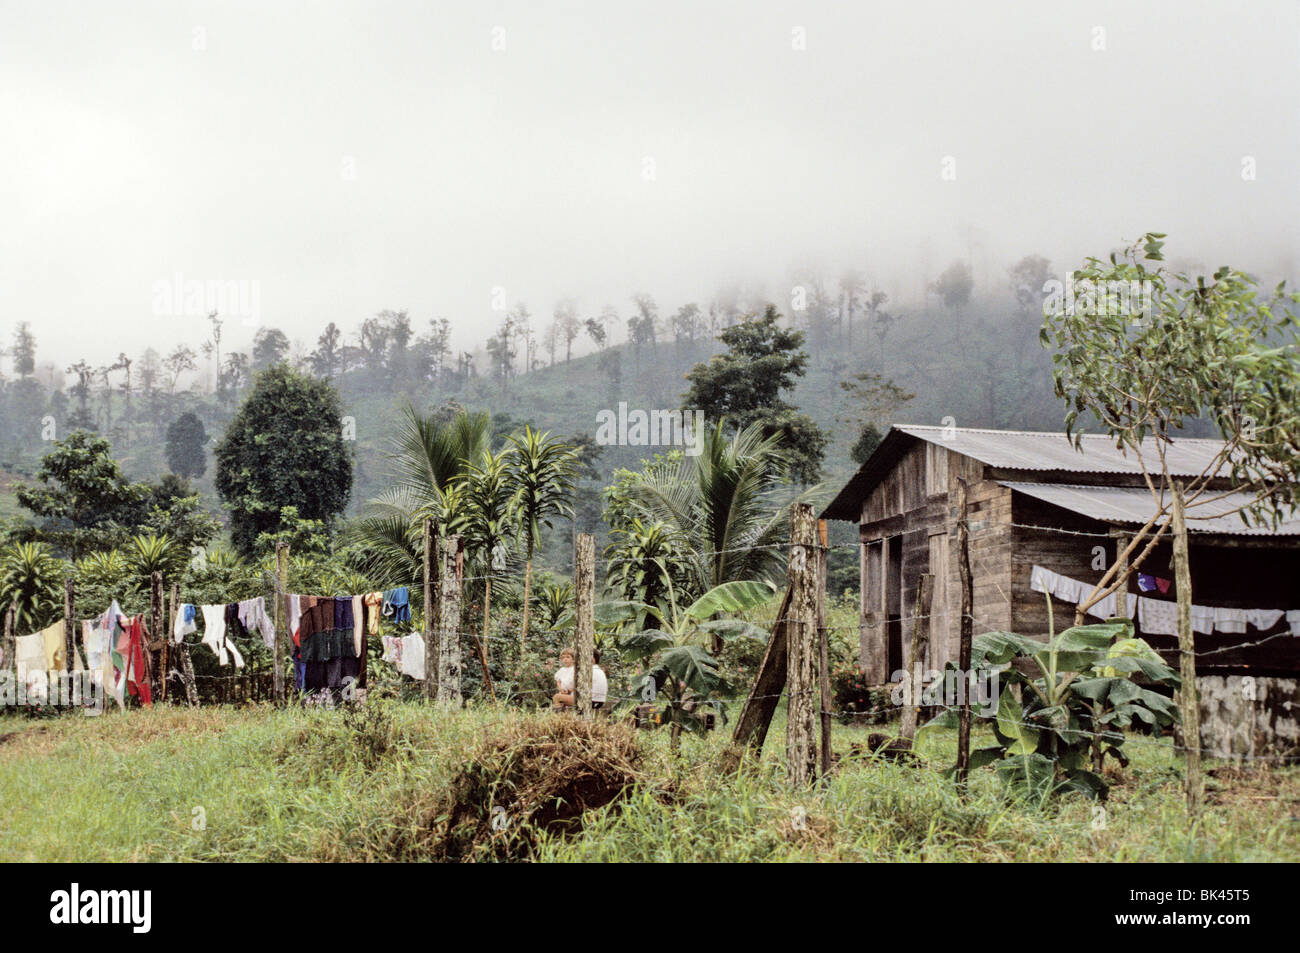 Foggy tropical scene of a rural dwelling with clothes drying, Costa Rica Stock Photo